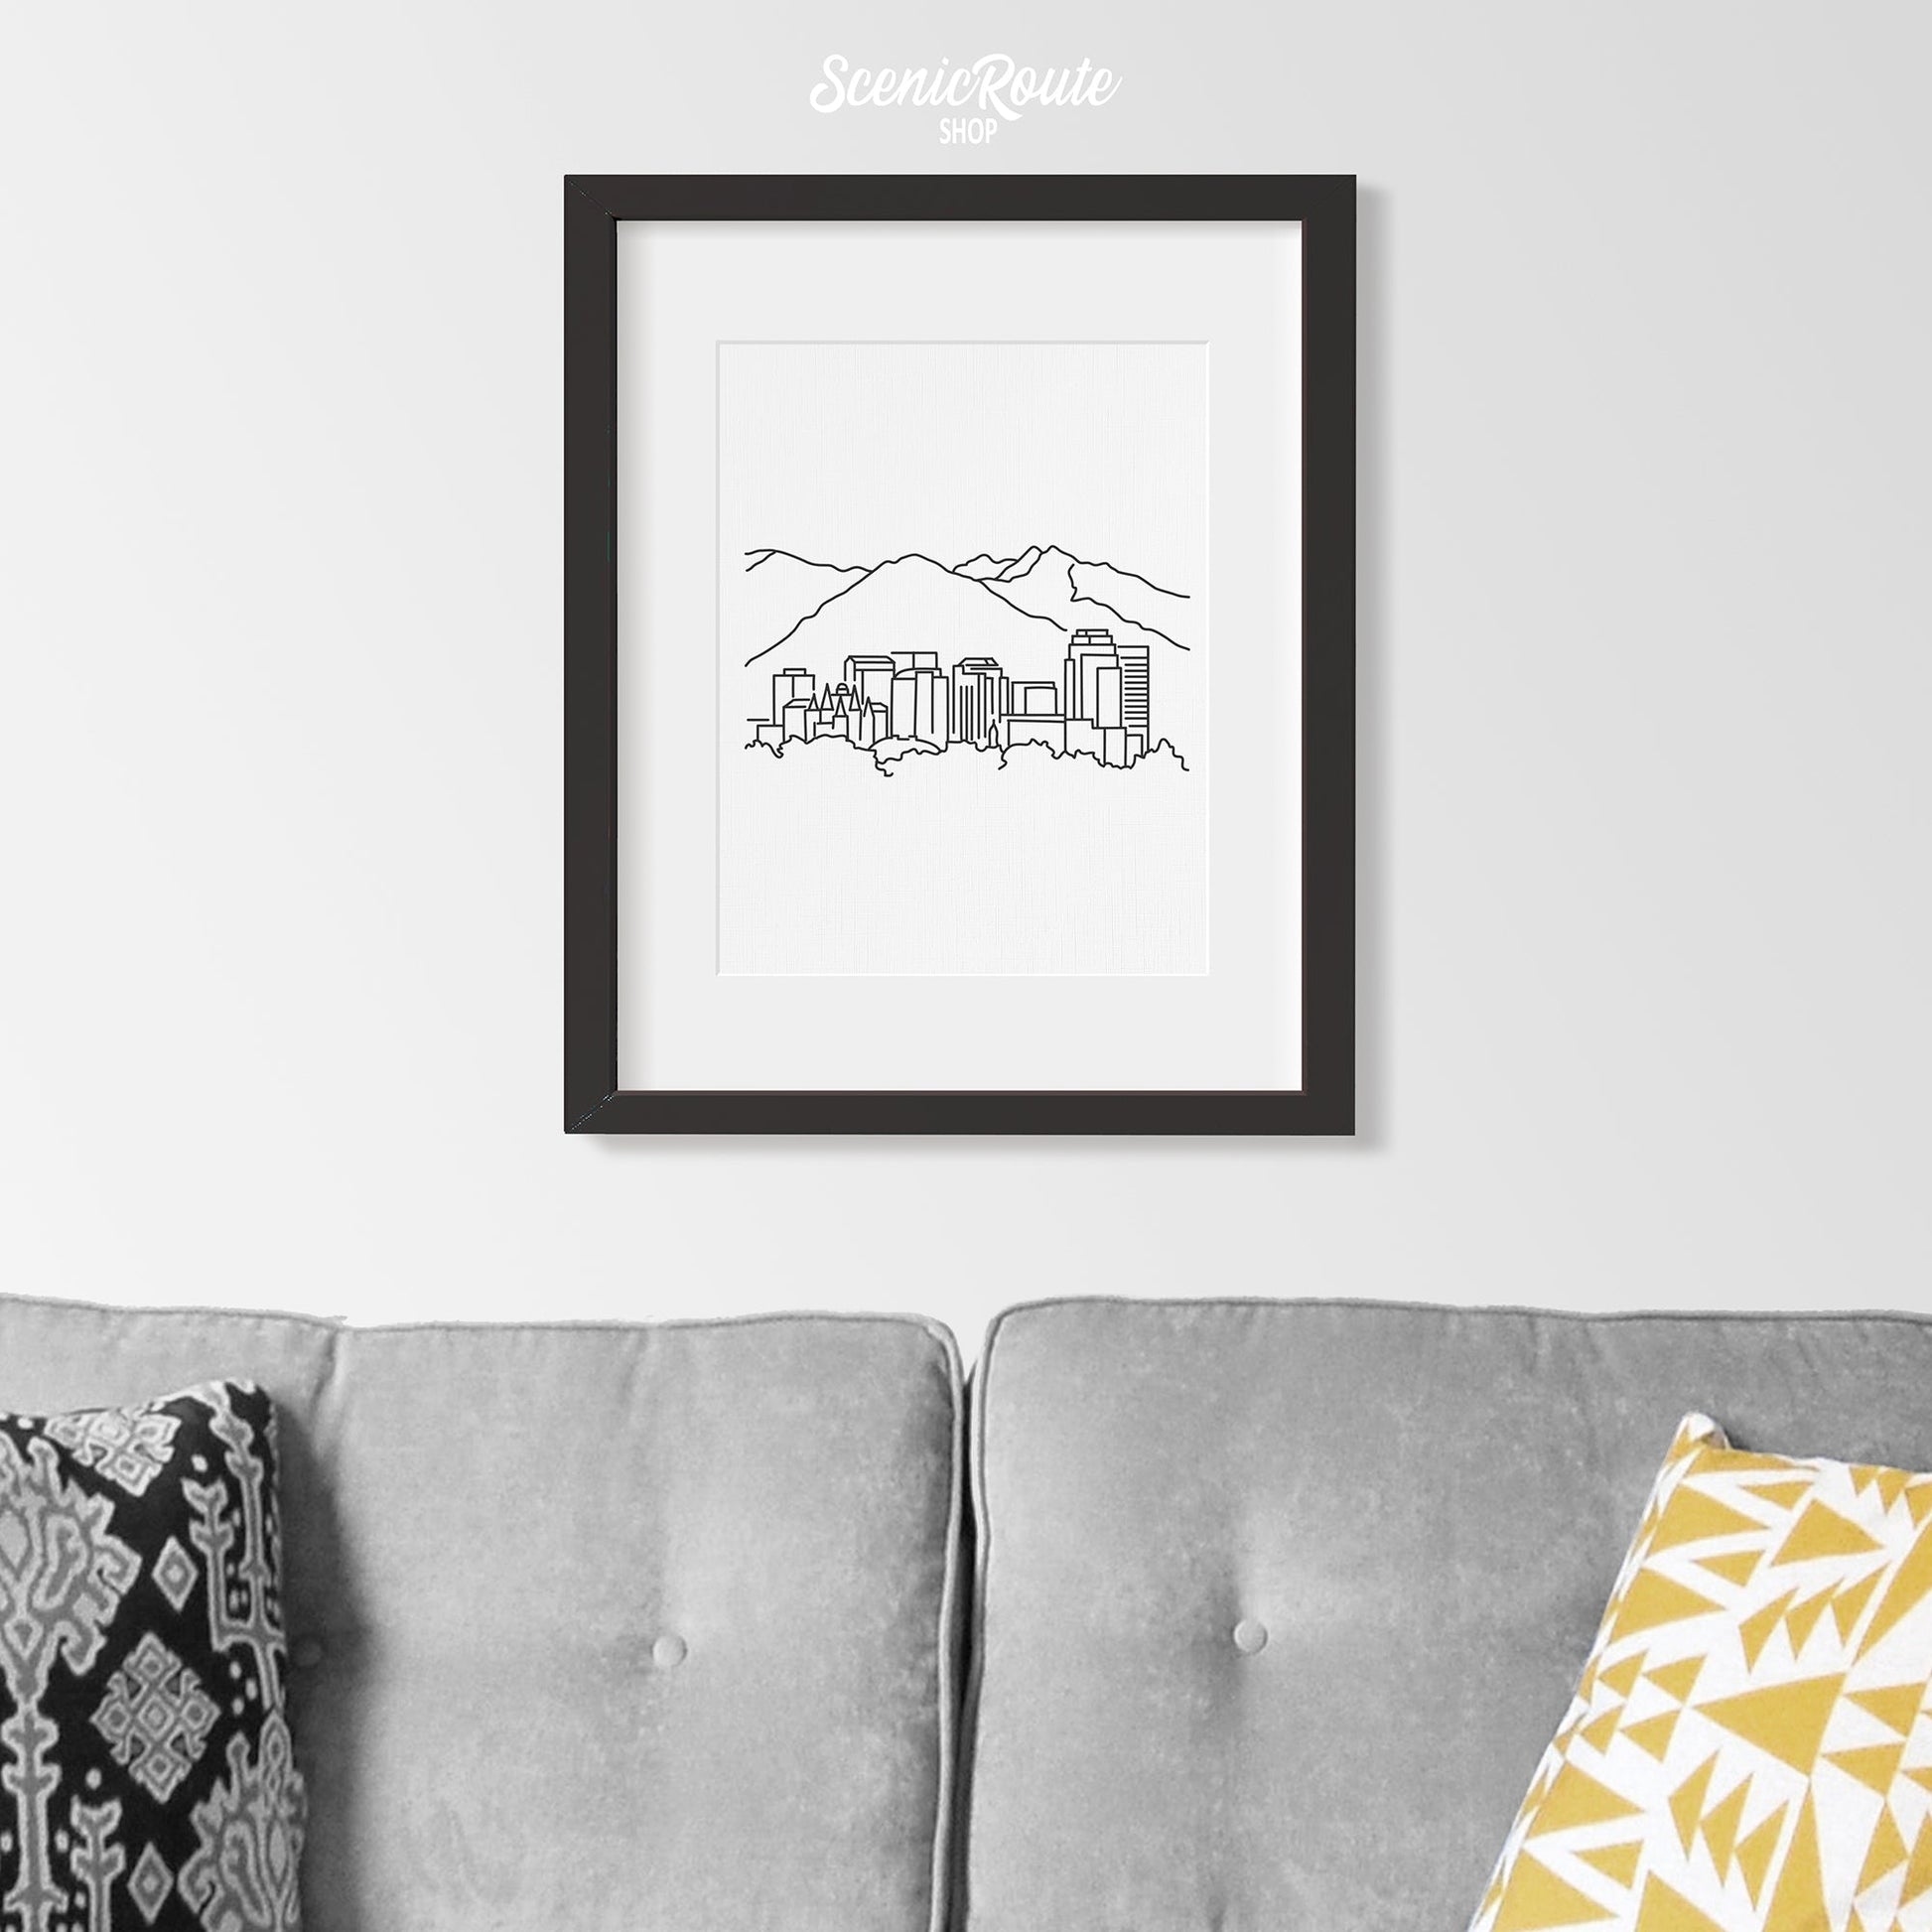 A framed line art drawing of the Salt Lake City Skyline above a couch